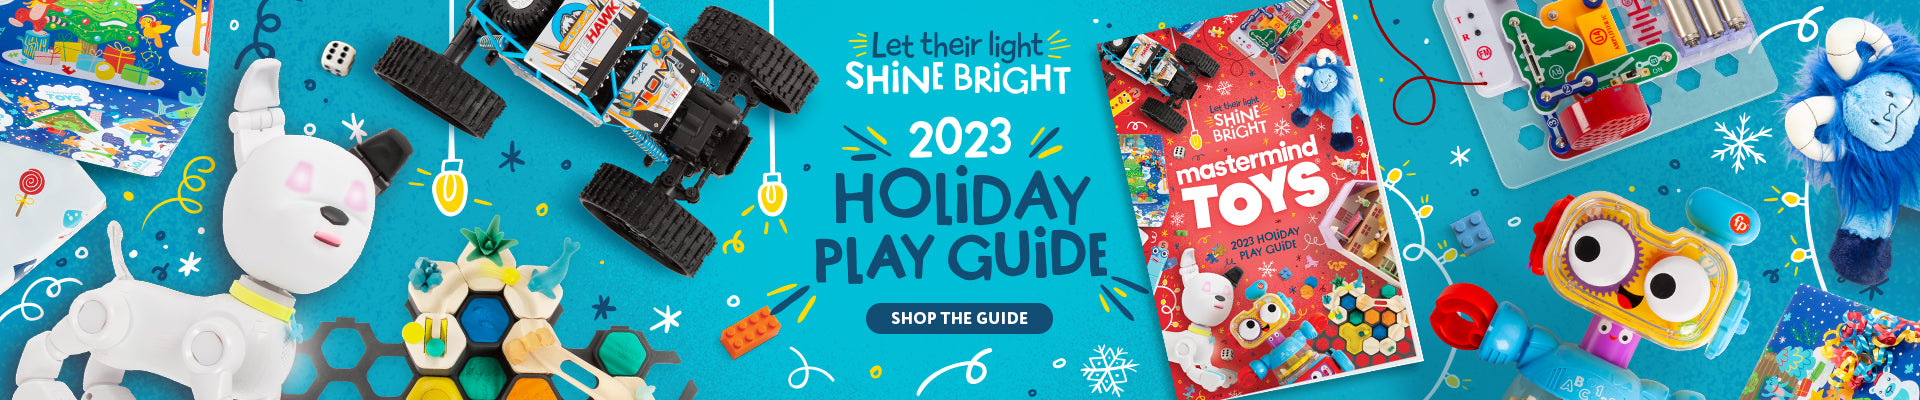 Let their light shine bright. Shop our 2023 Holiday Play Guide.